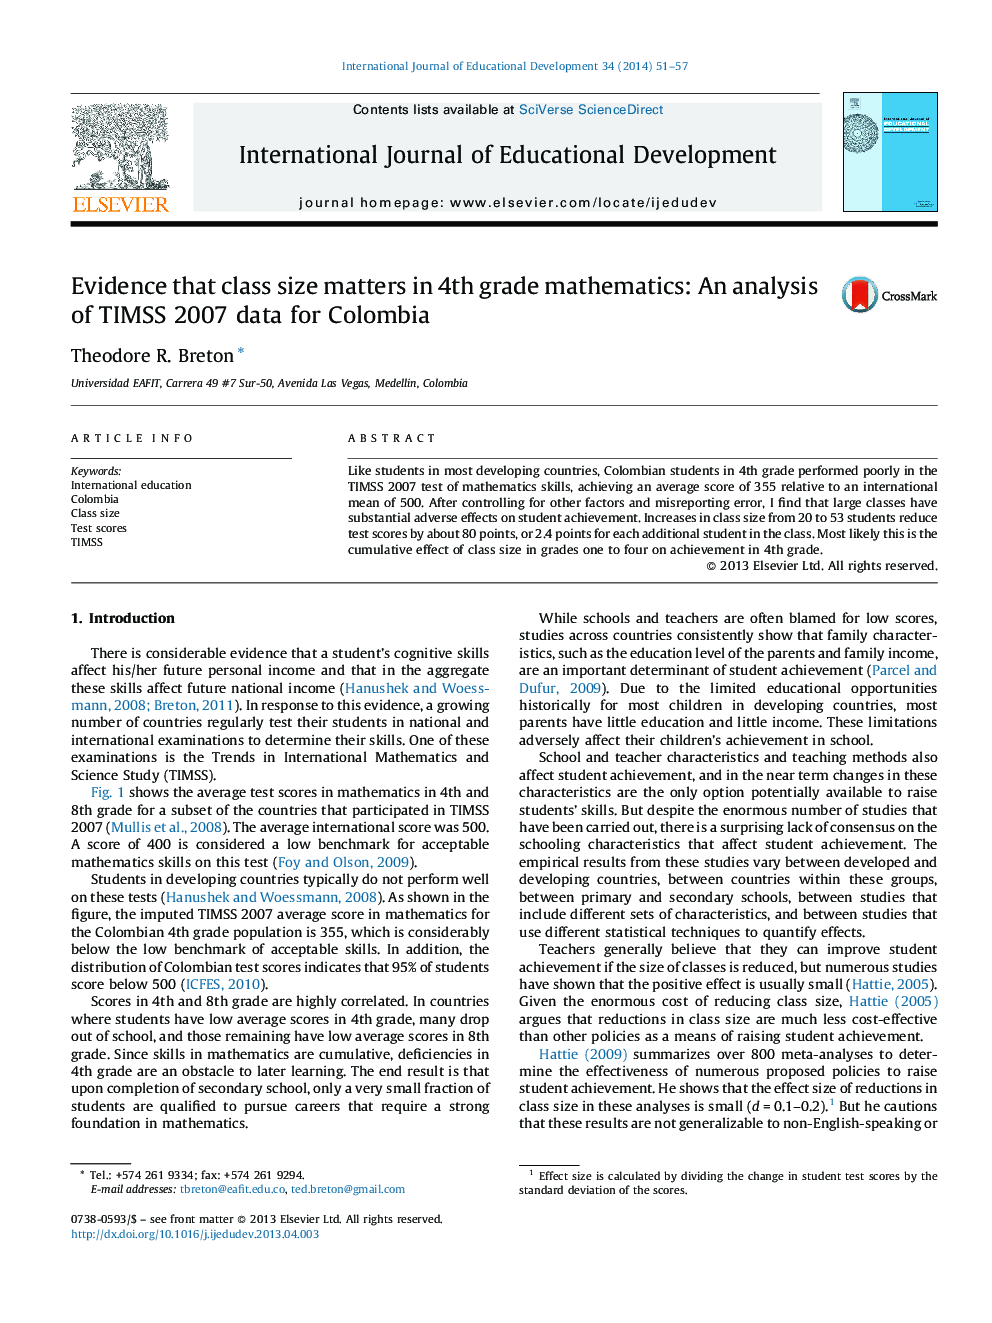 Evidence that class size matters in 4th grade mathematics: An analysis of TIMSS 2007 data for Colombia